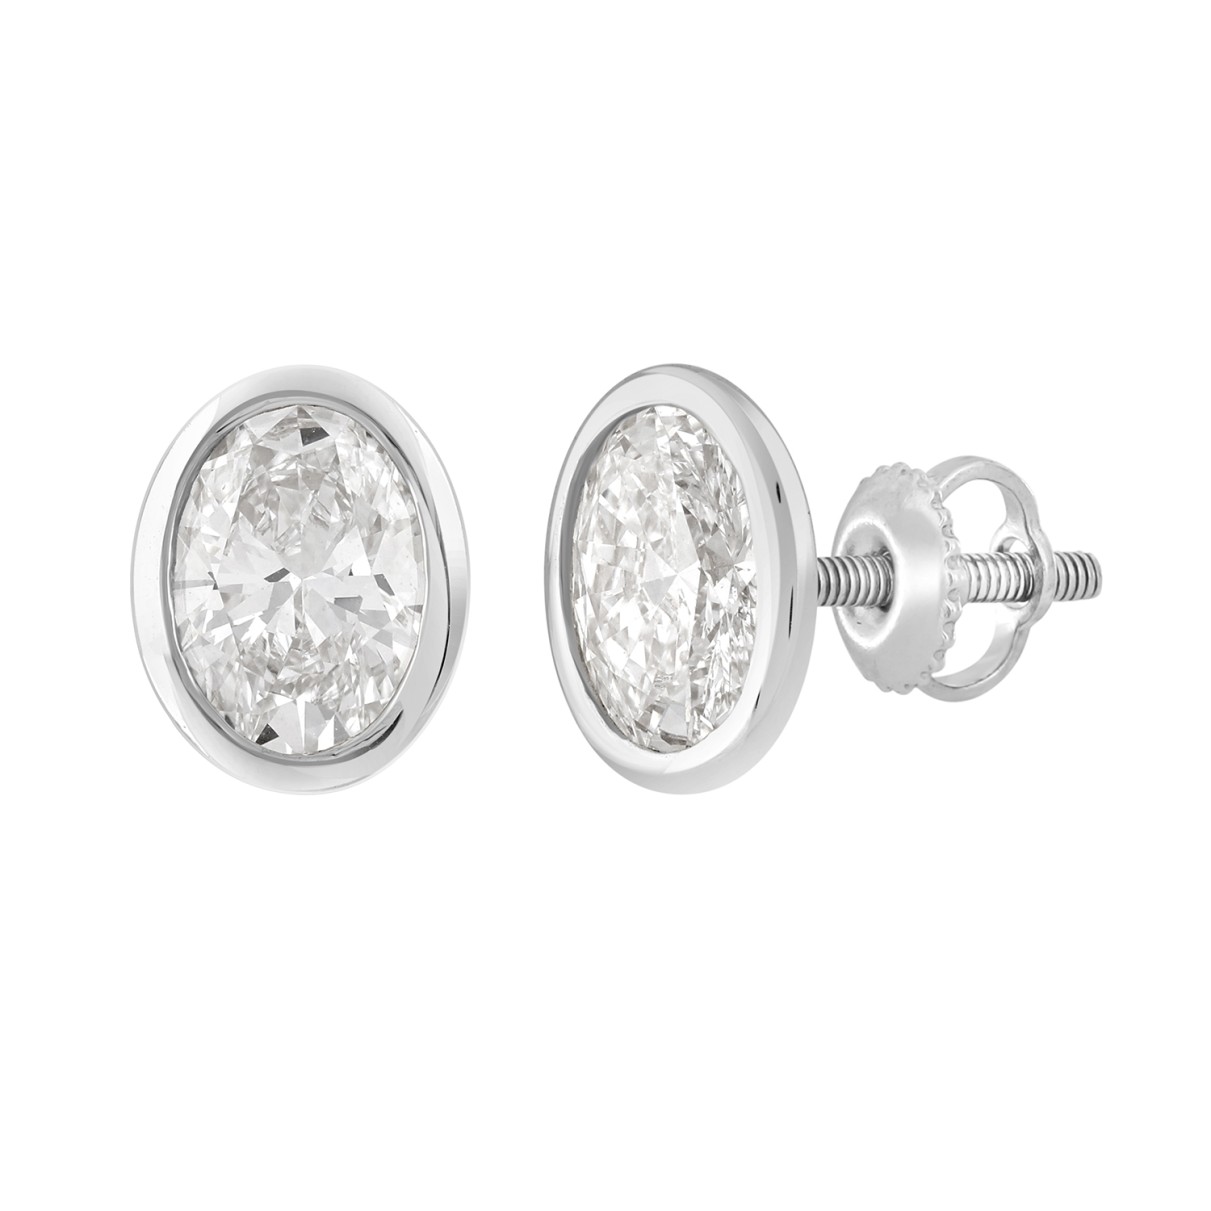 LADIES SOLITAIRE EARRINGS  3CT OVAL DIAMOND 14K WHITE GOLD